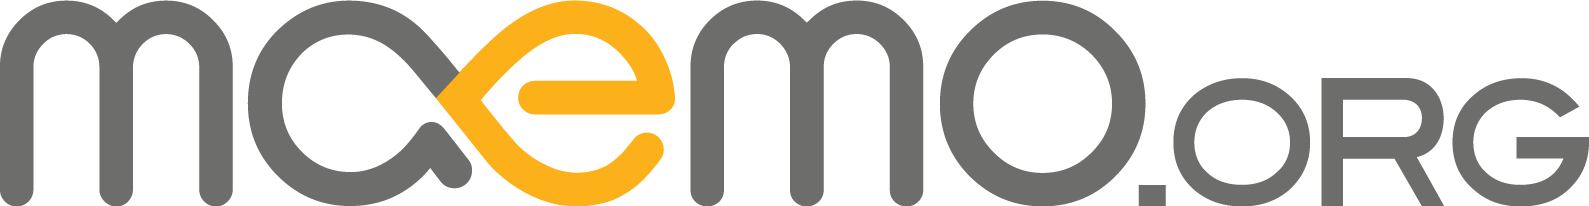 maemo.org logo in PNG format